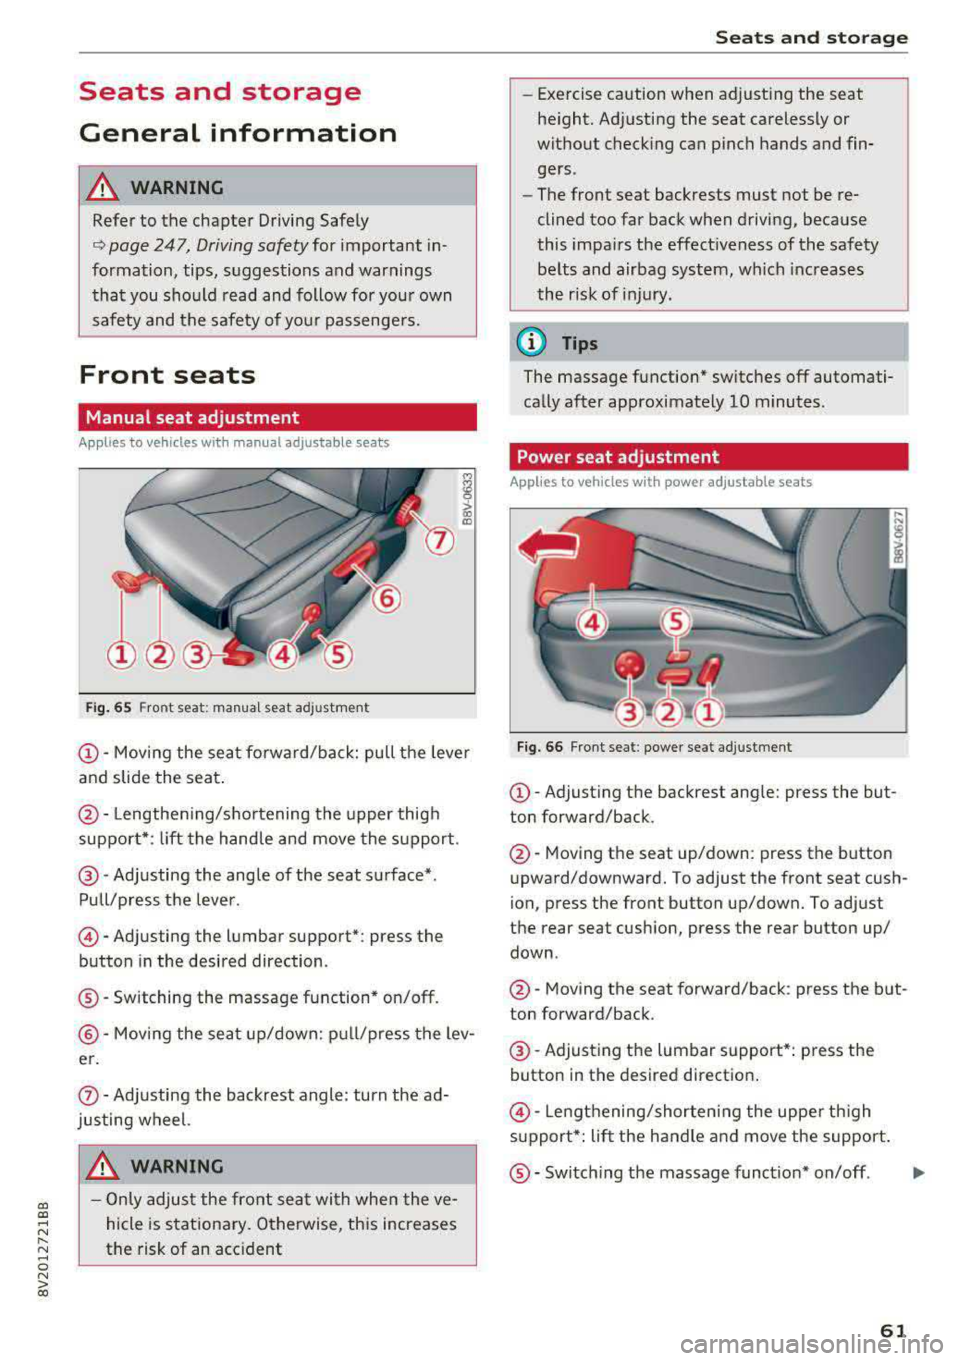 AUDI A3 SEDAN 2017  Owners Manual a,  a, ..... N 
" N ..... 0 N > 00 
Seats  and  storage  
General  information 
A WARNING 
Refer  to  the  chapter  Driving Safely 
~ page  247,  Driving  safety for  important  in­
formation,  tips,